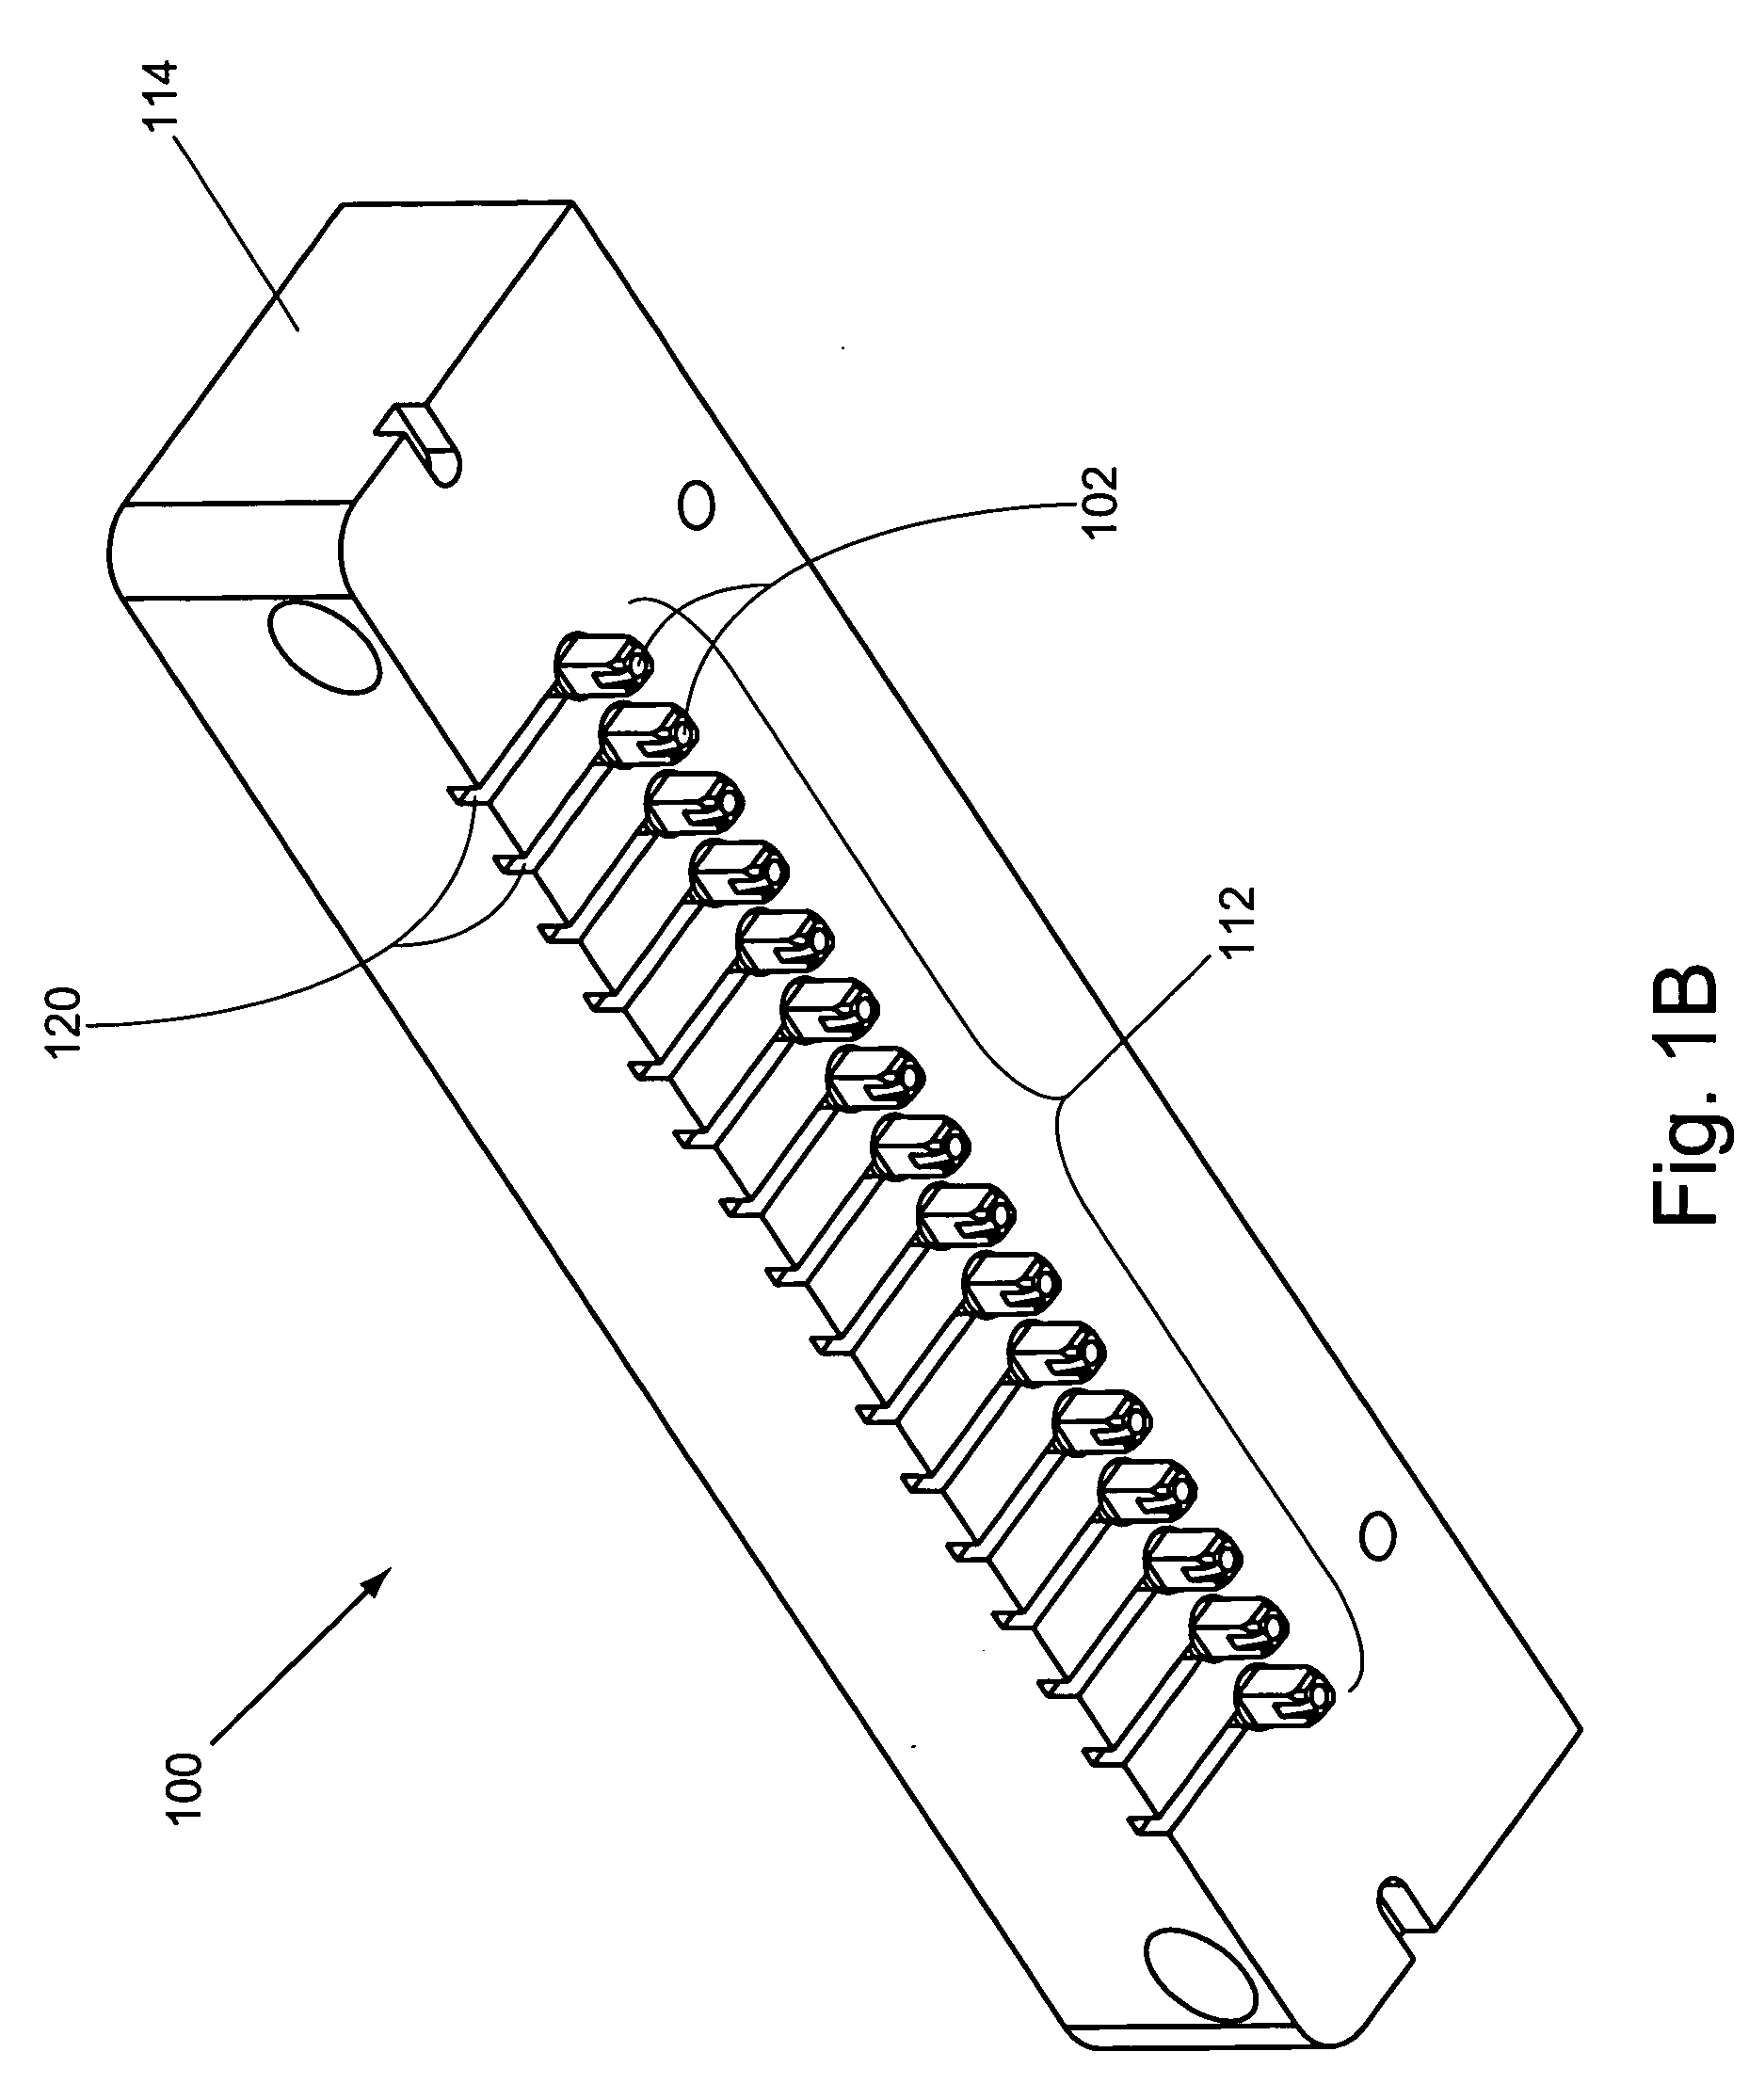 Material removal and dispensing devices, systems, and methods